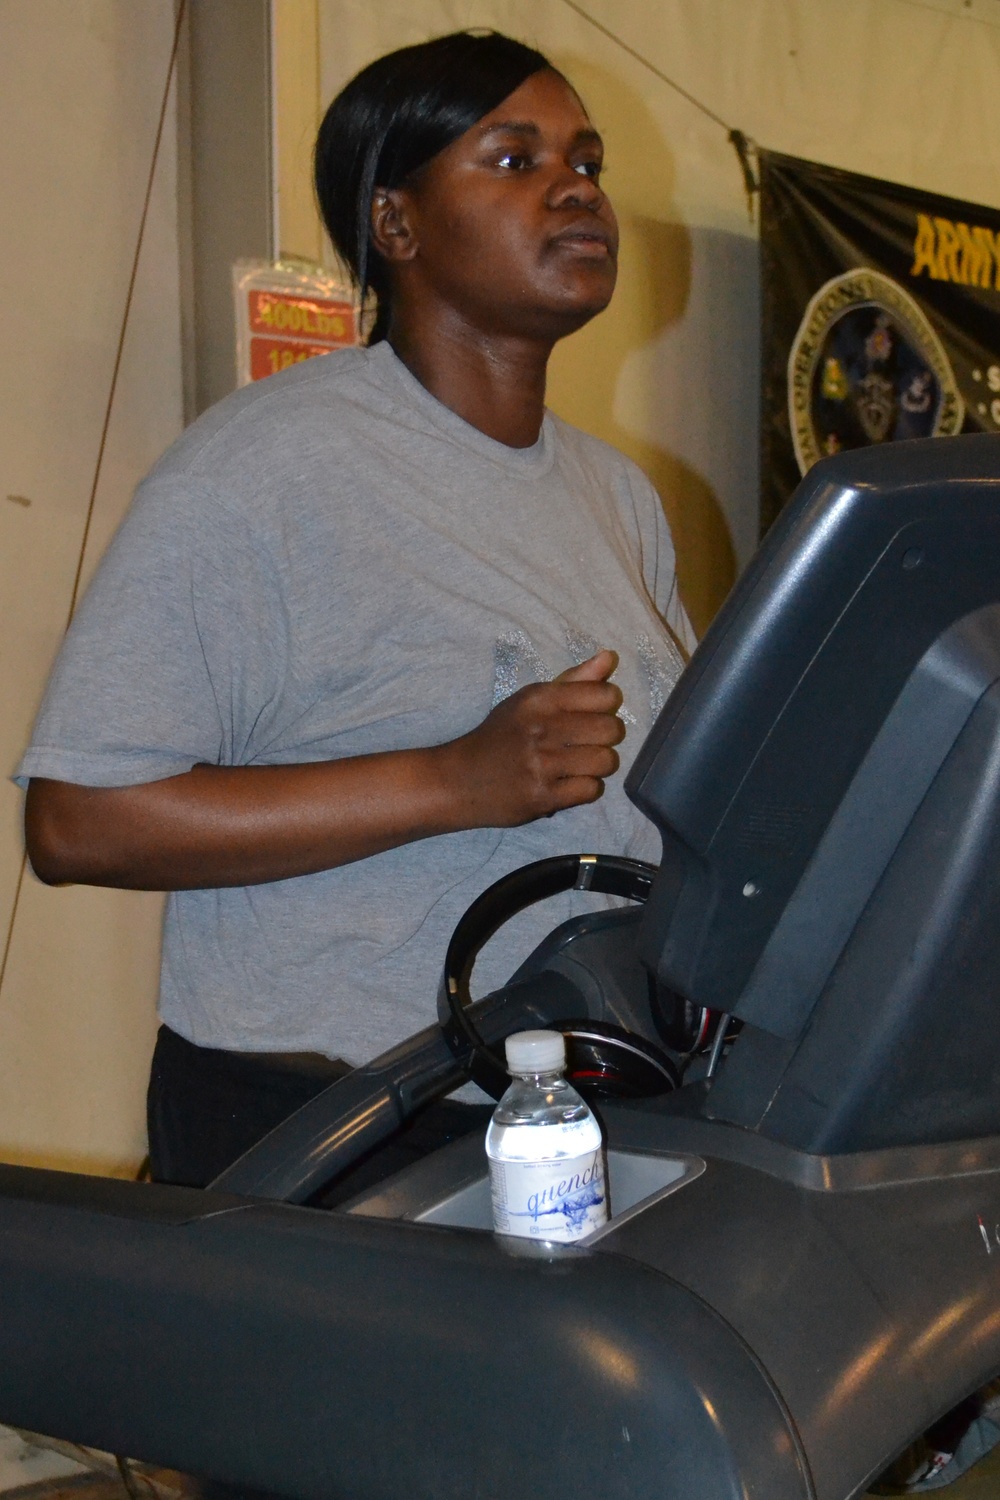 Providers sustain a healthy force through Comprehensive Soldier Fitness